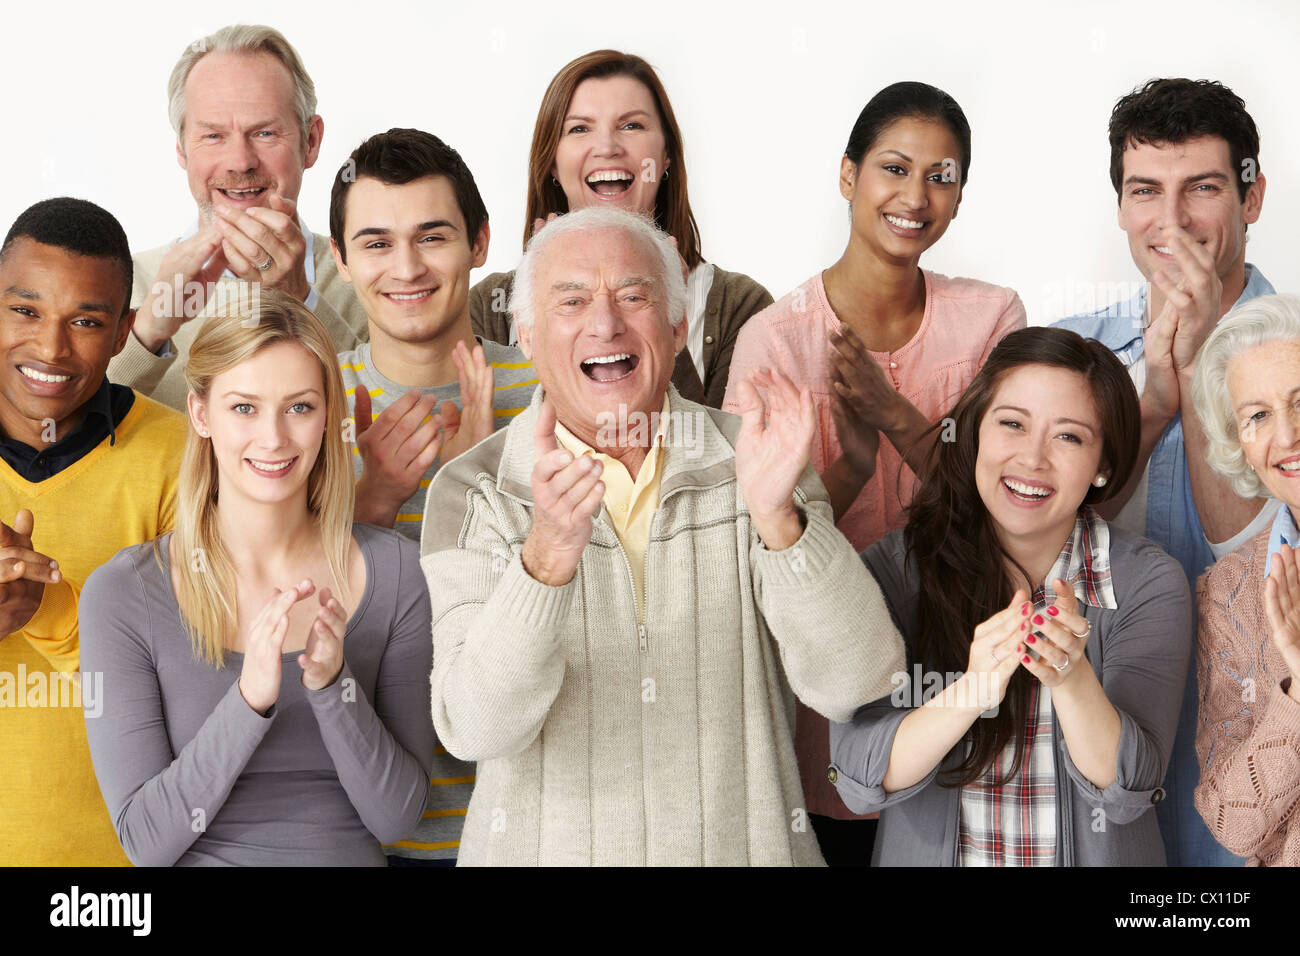 group-of-people-clapping-CX11DF.jpg